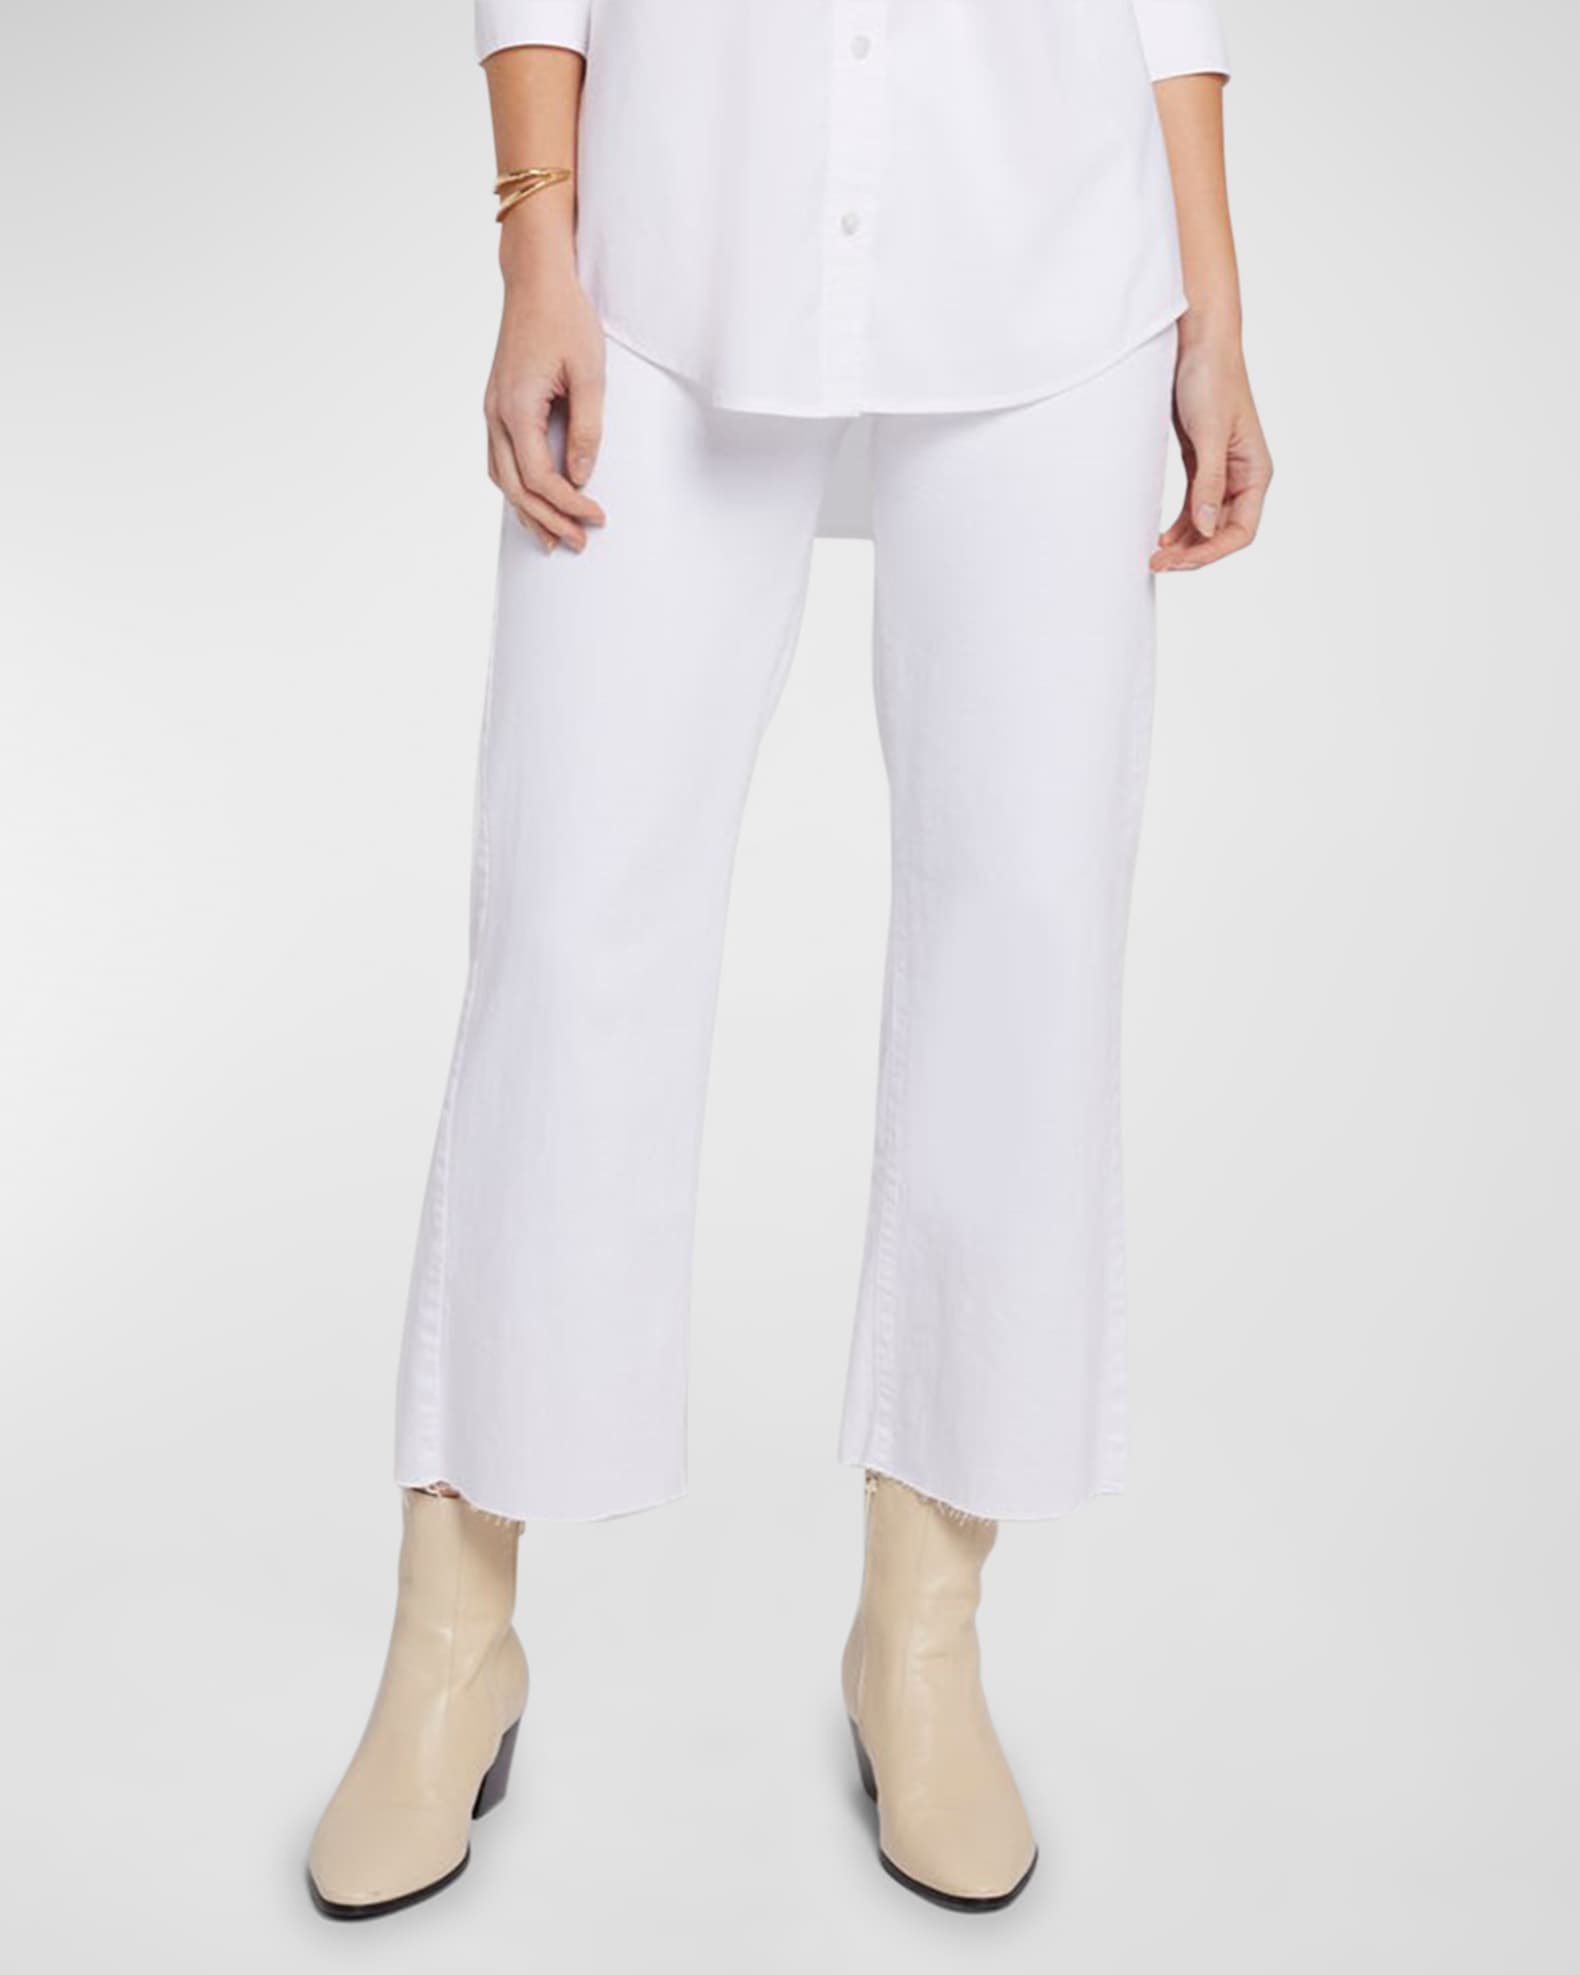 7 for all mankind Cropped Alexa Jeans with Cut Hem | Neiman Marcus